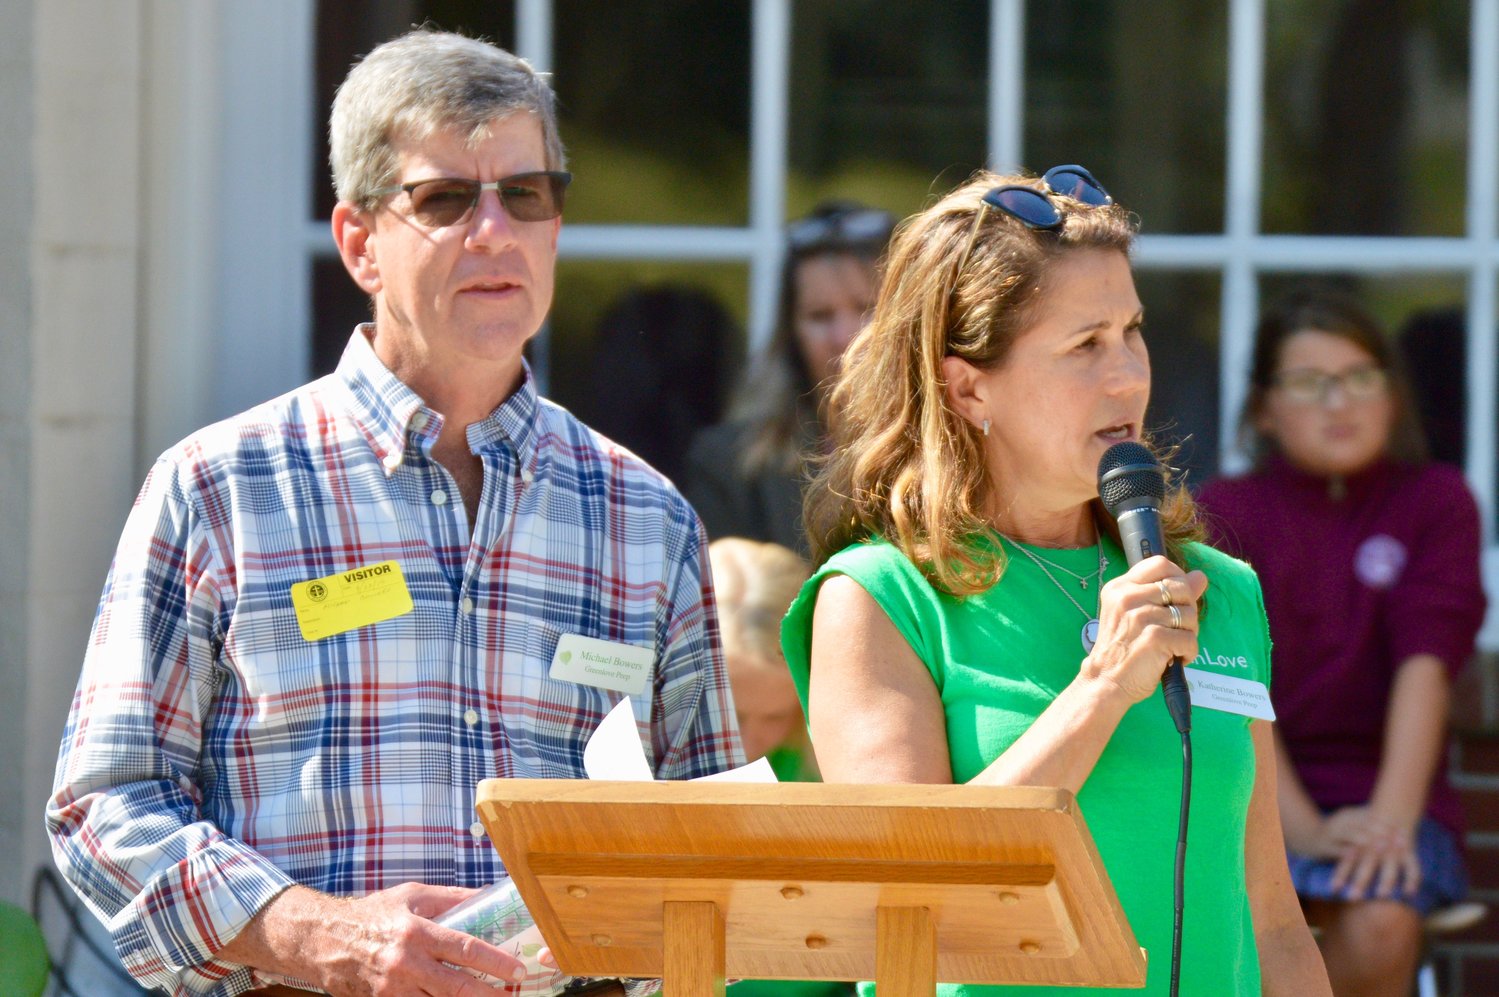 Michael and Katherine Bowers explain the mission of the Greenlove Foundation to students.